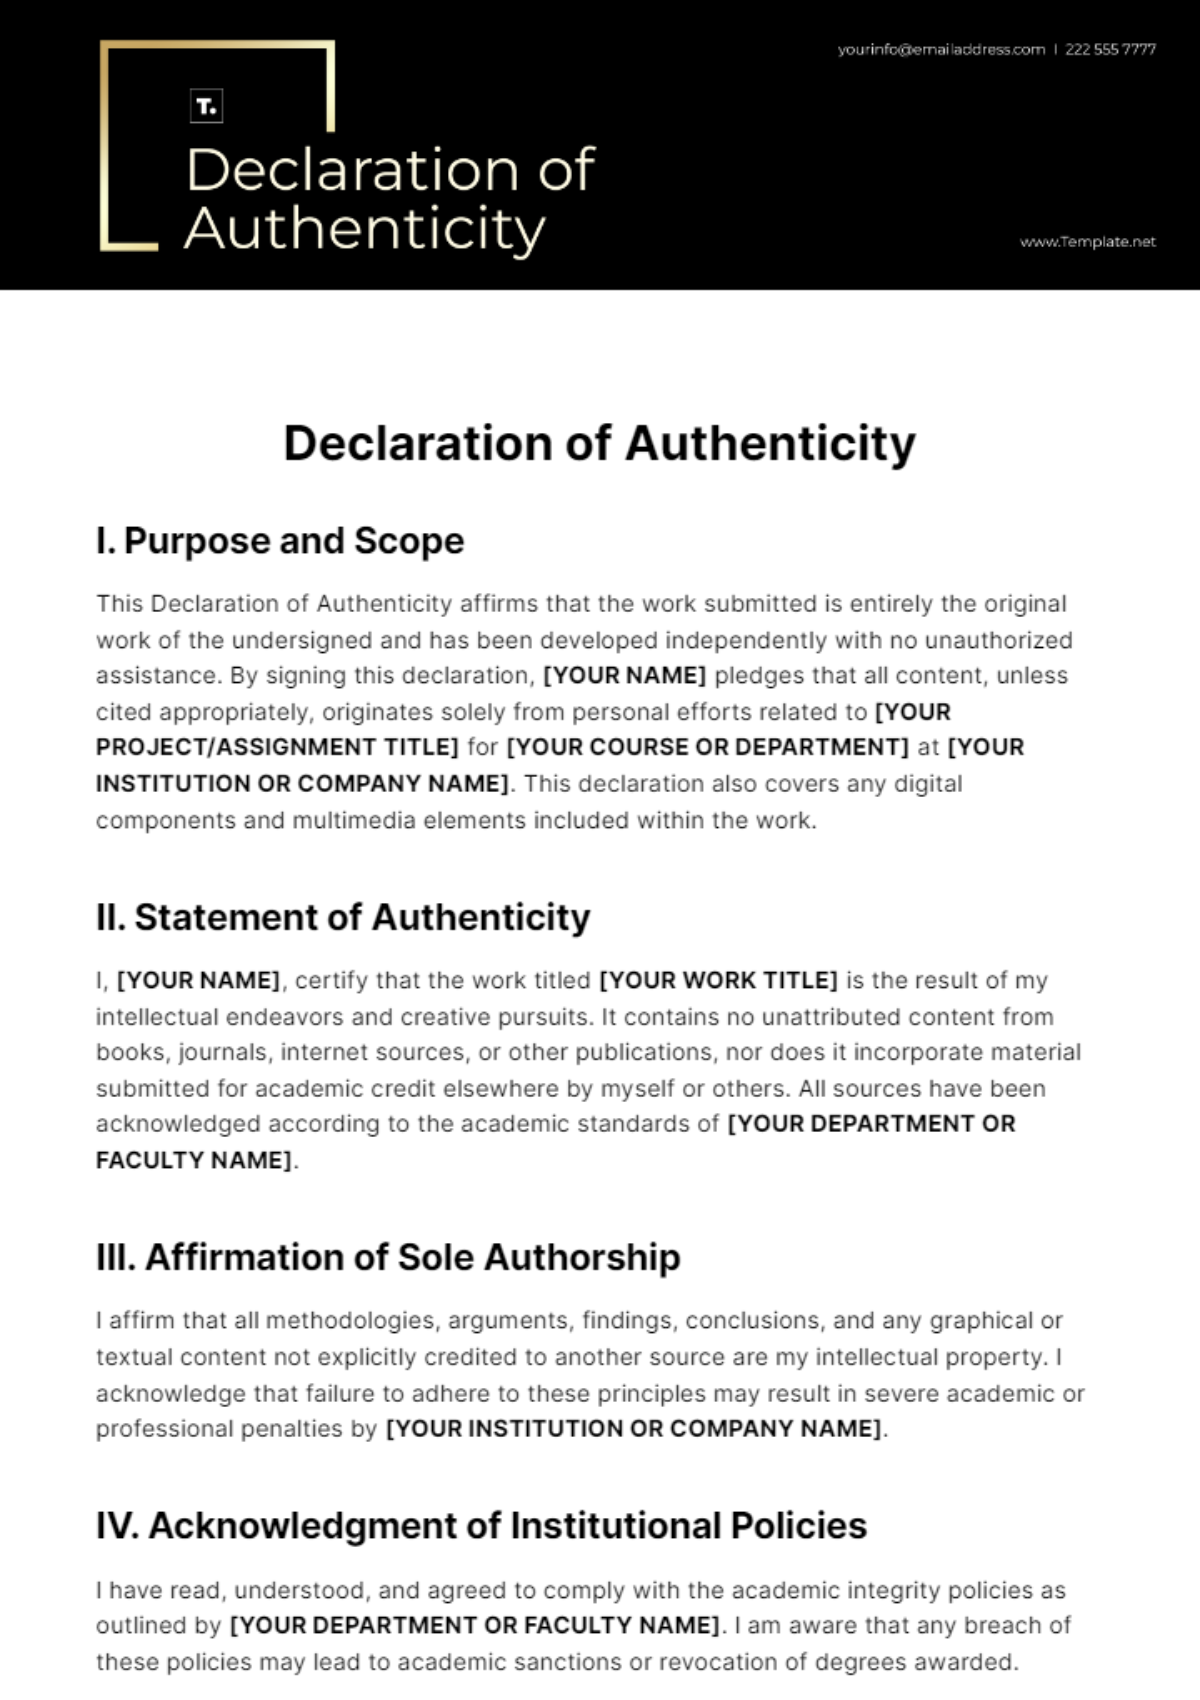 Declaration of Authenticity Template